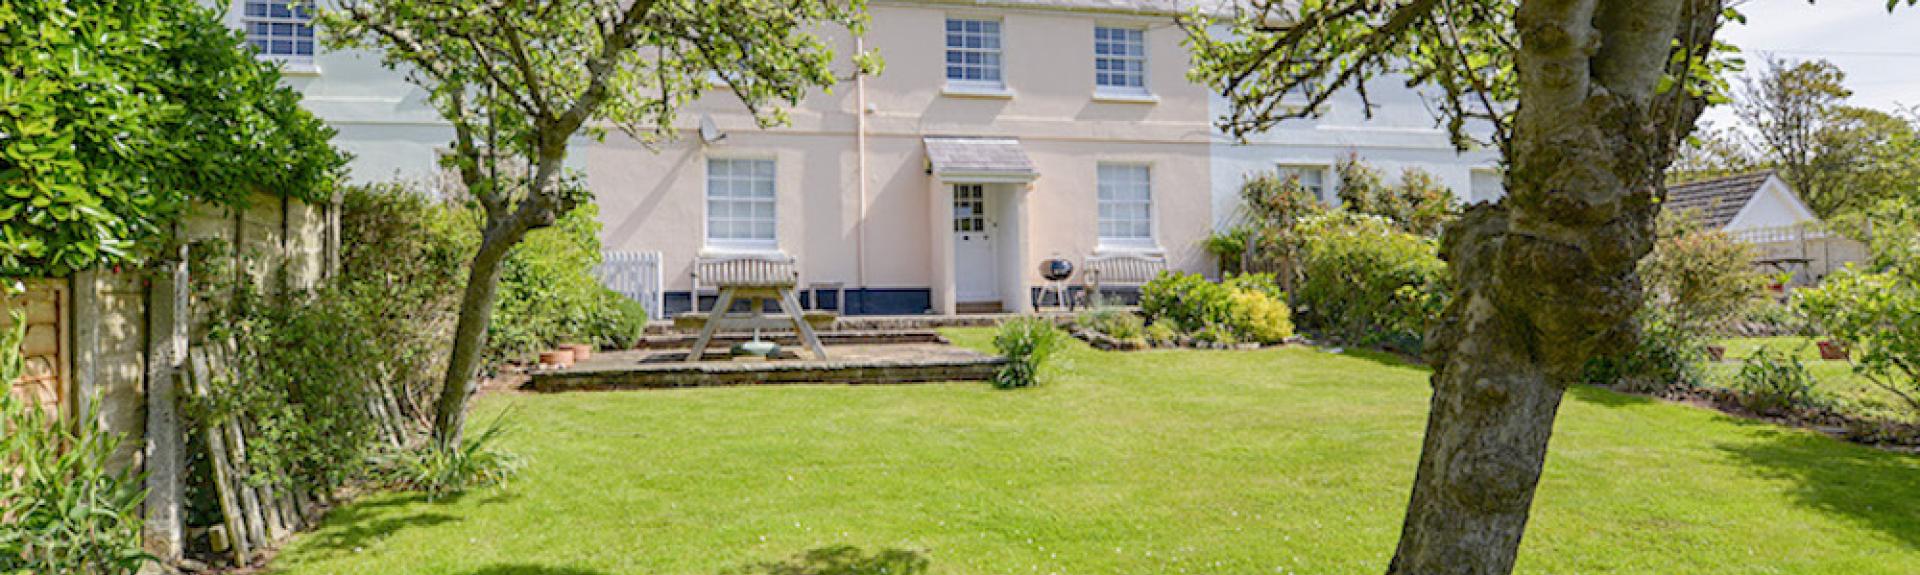 A double-fronted Hope Cove holiday cottage overlooks a large lawn.